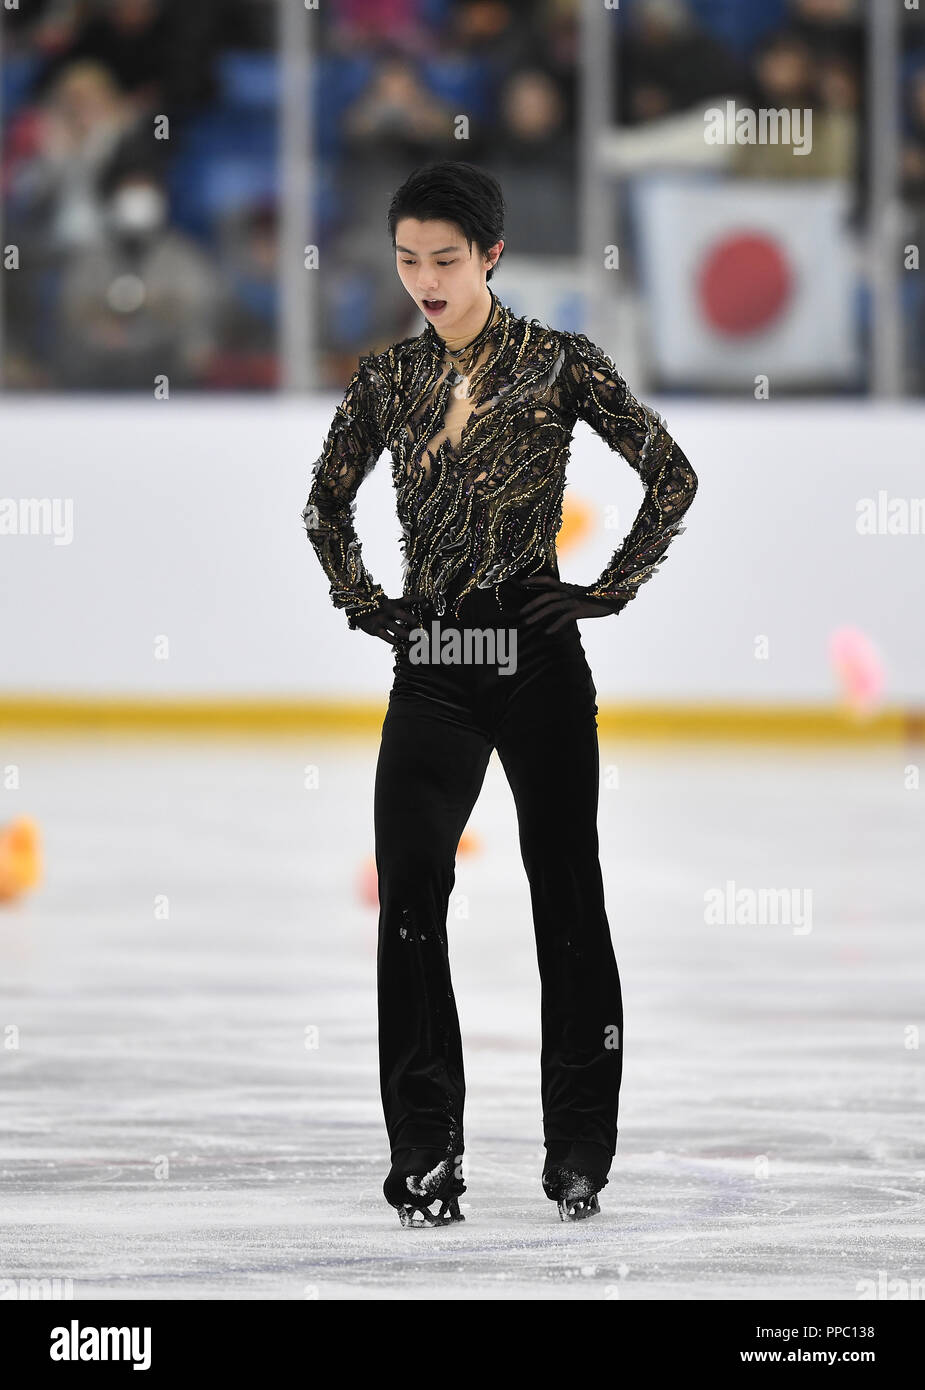 Yuzuru Hanyu of Japan after performing in the Men's Free Skating during the 2018 Autumn Classic International at Sixteen Mile Sports Complex in Oakville, Ontario, Canada, September 22, 2018. (Photo by AFLO) Stock Photo